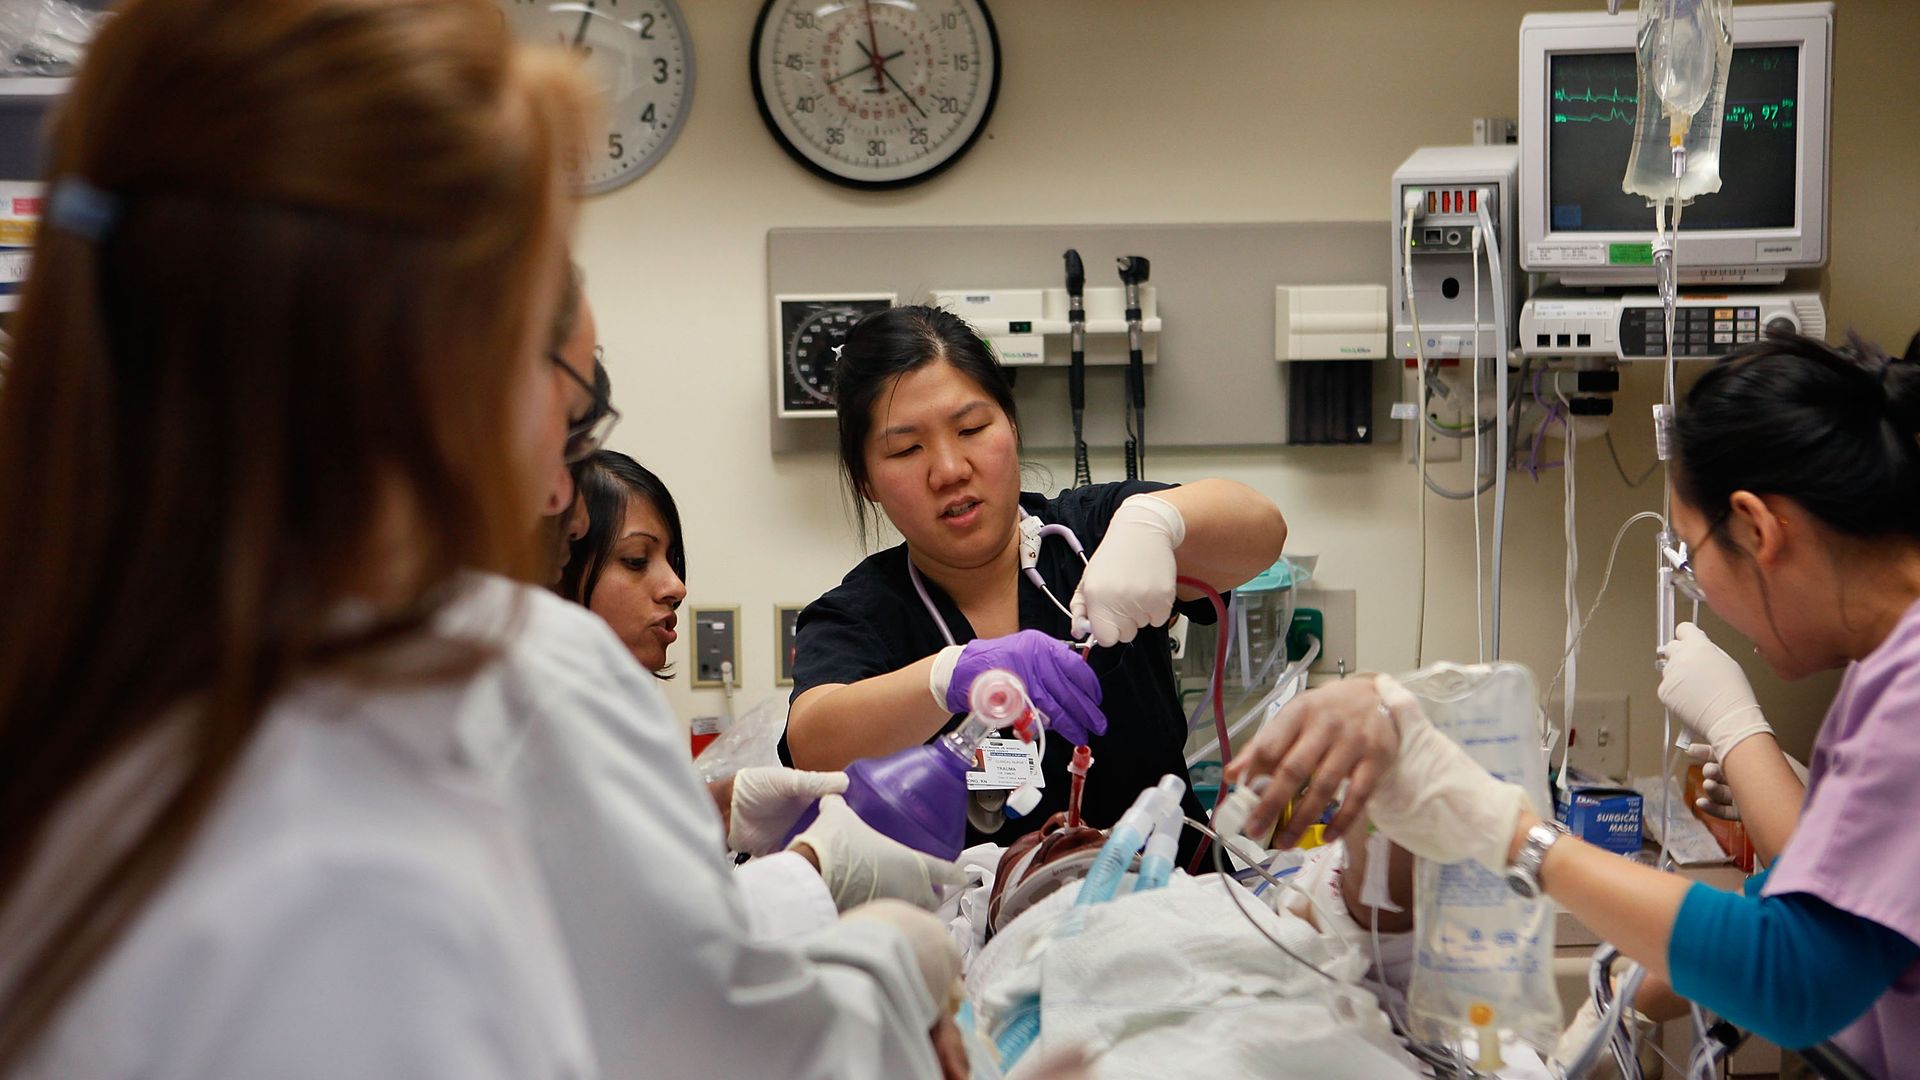 Doctors and nurses treat a patient in a hospital trauma room.